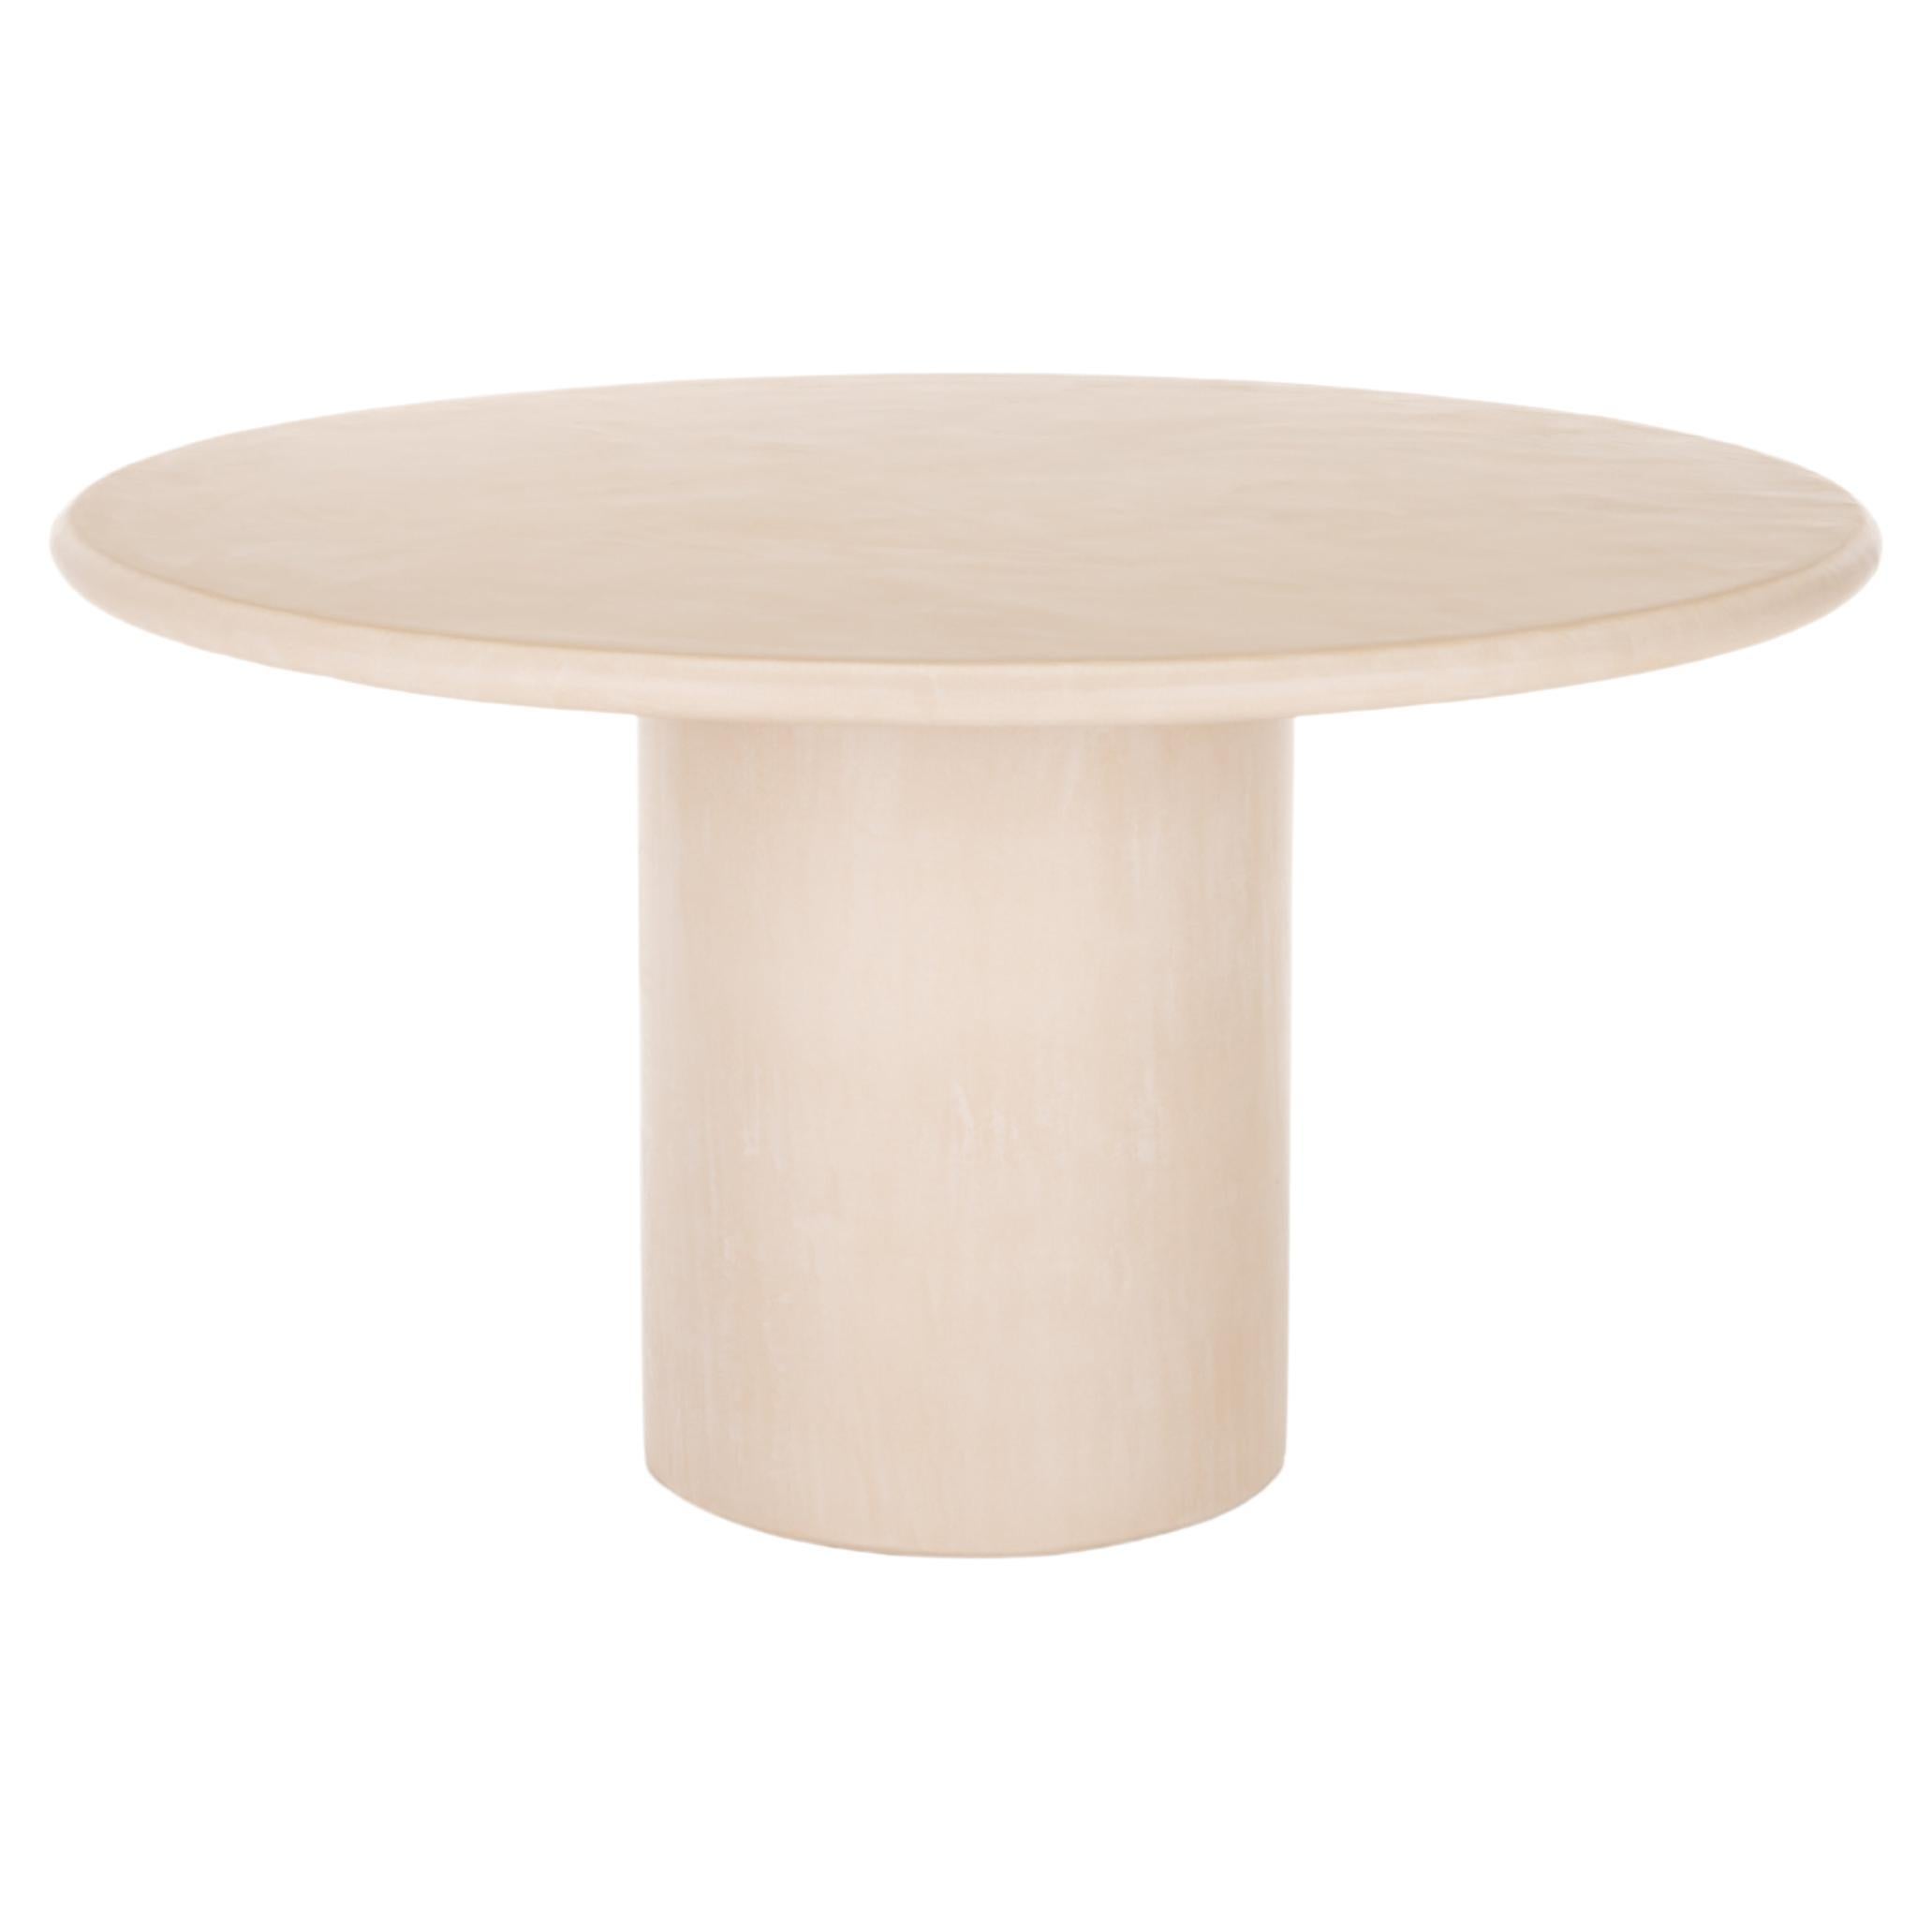 Natural Plaster Dining Table "Column" 140 by Isabelle Beaumont For Sale